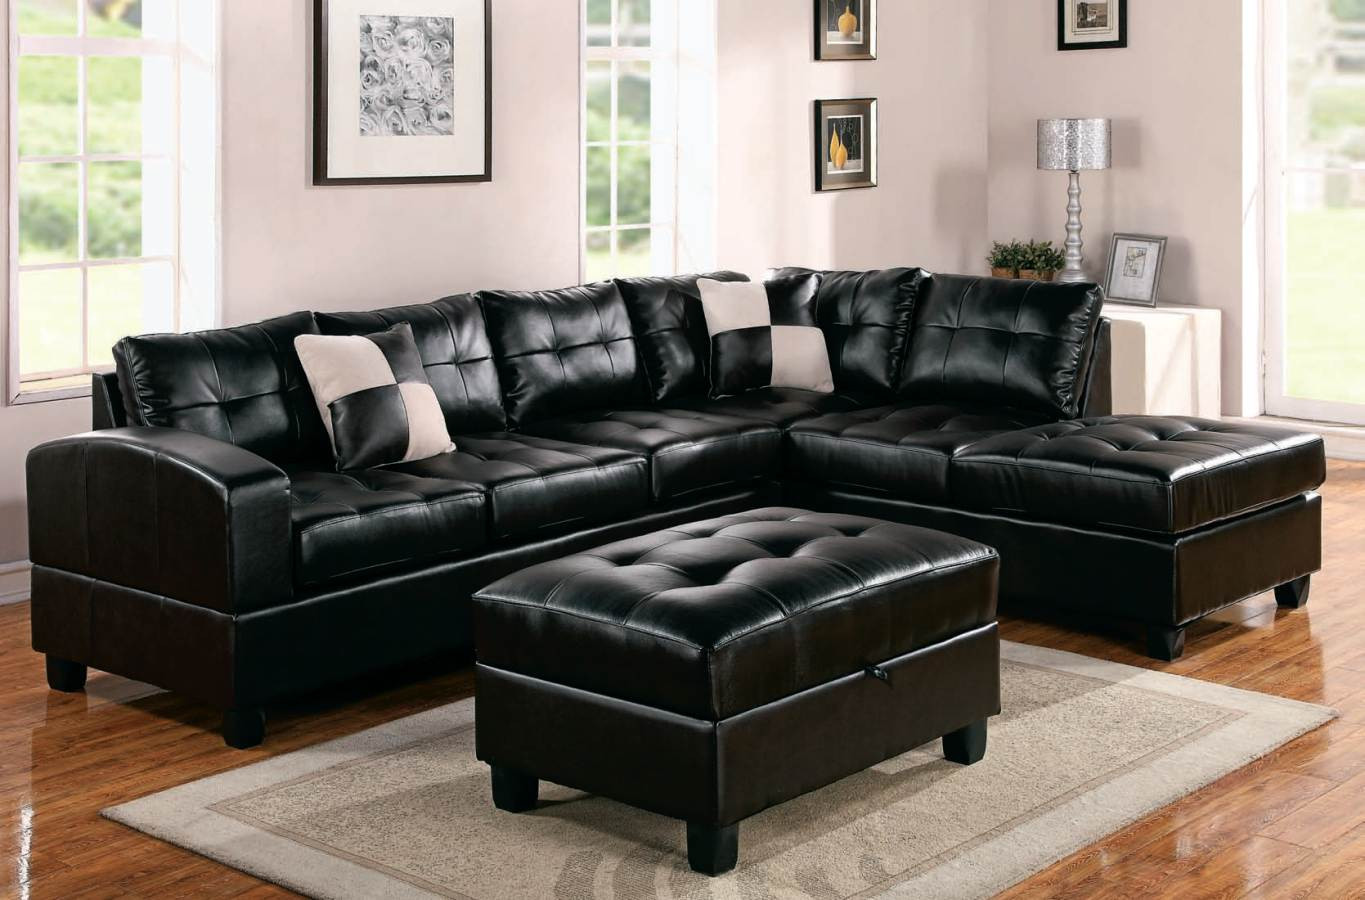 Black Furniture Living Room Ideas
 Decorating a Room with Black Leather Sofa Traba Homes